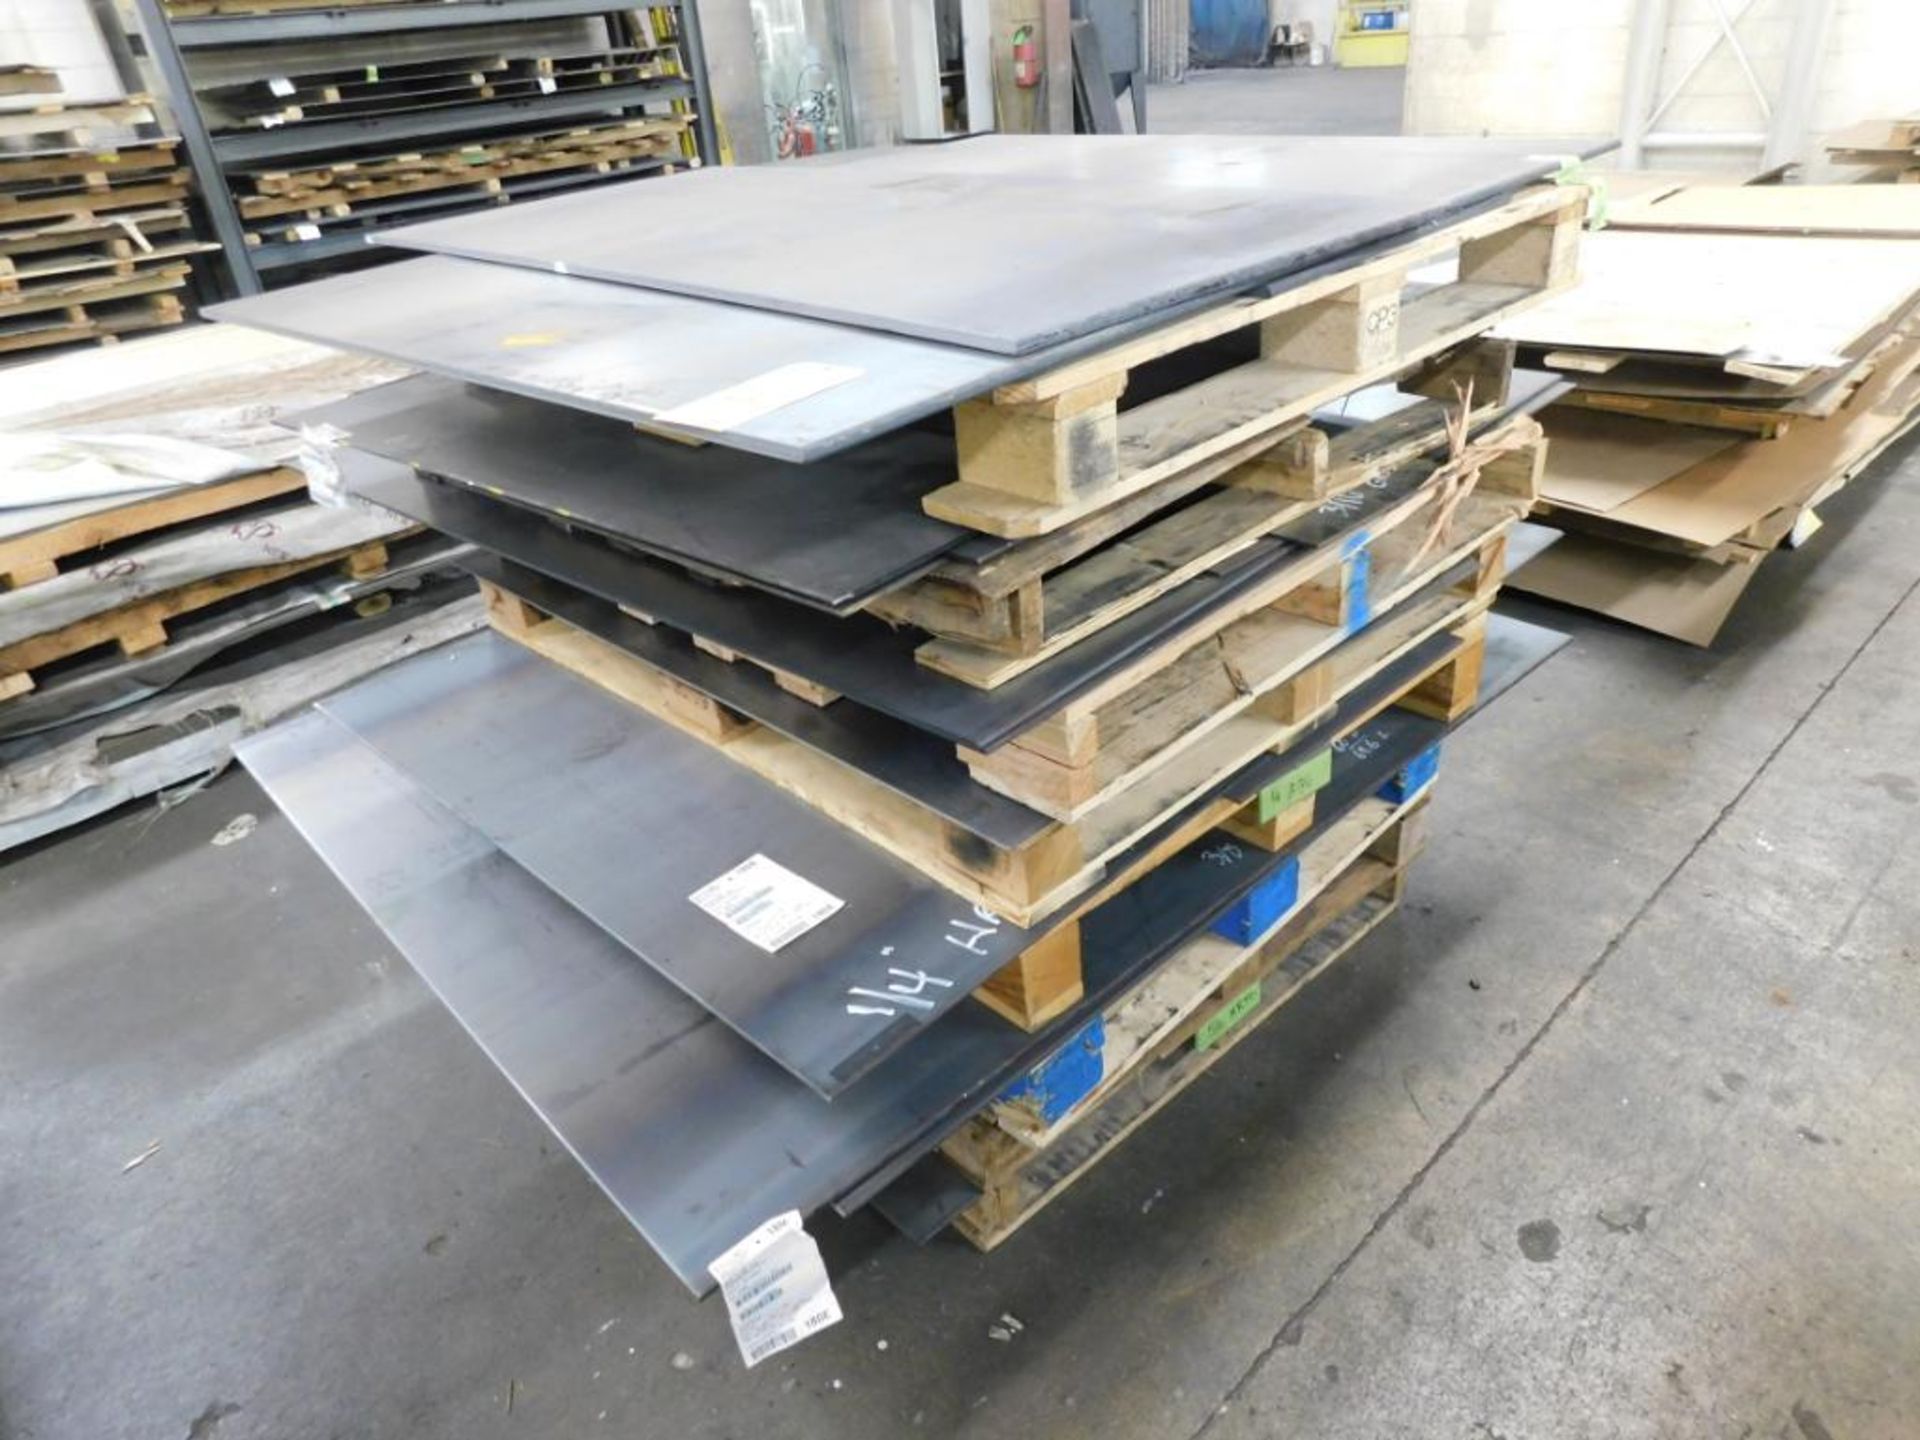 LOT: Assorted Material on Pallets